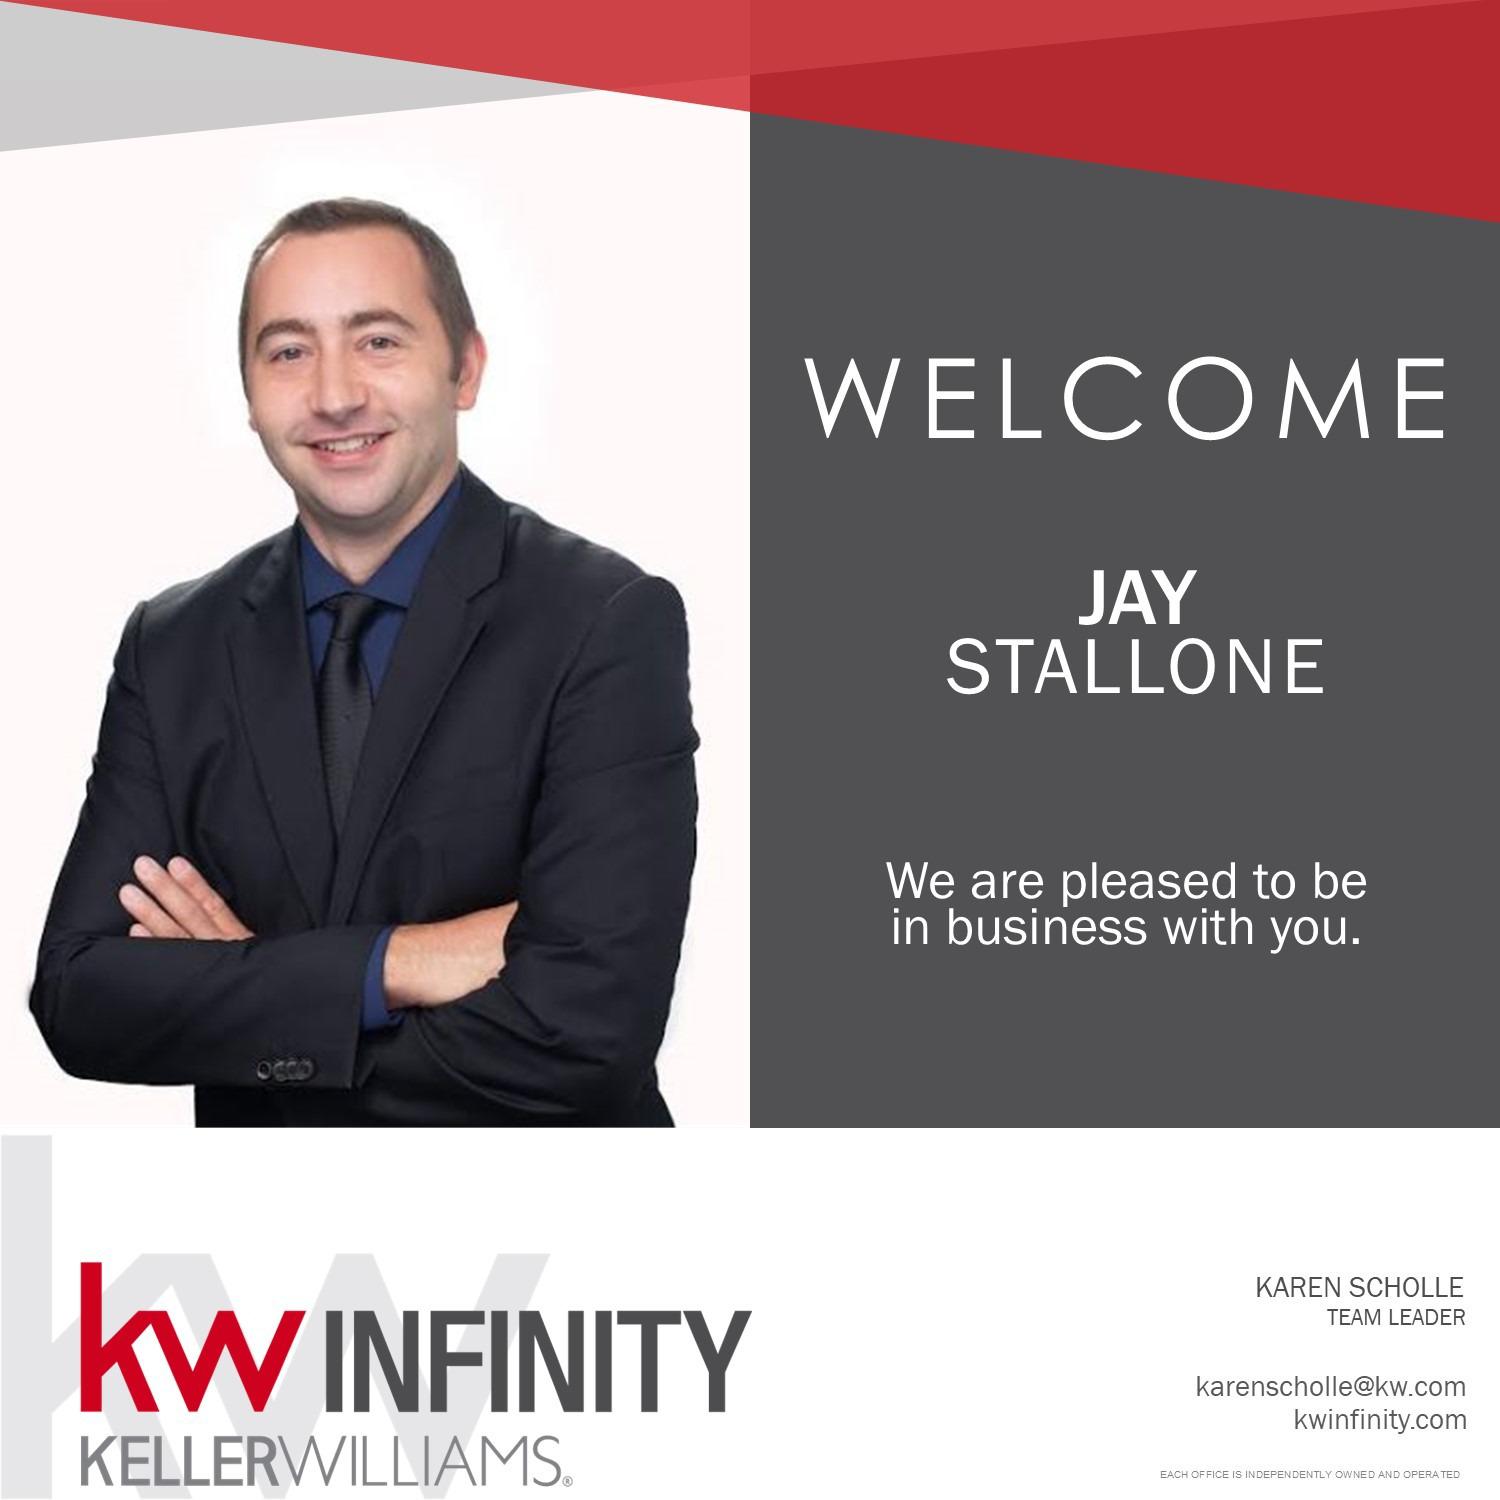 Welcome, Jeremy (Jay) Stallone to The Giovanna Group-Keller Williams Infinity Group! He lives in North Aurora and is married with a 2-year-old daughter. He also comes from a background in customer service and technology. When you are thinking of buying or selling a property call us at 630-333-2798. We make it simple because we care. The Giovanna Group-Keller Williams Infinity Group 105 E Spring St. Yorkville, IL 60560.